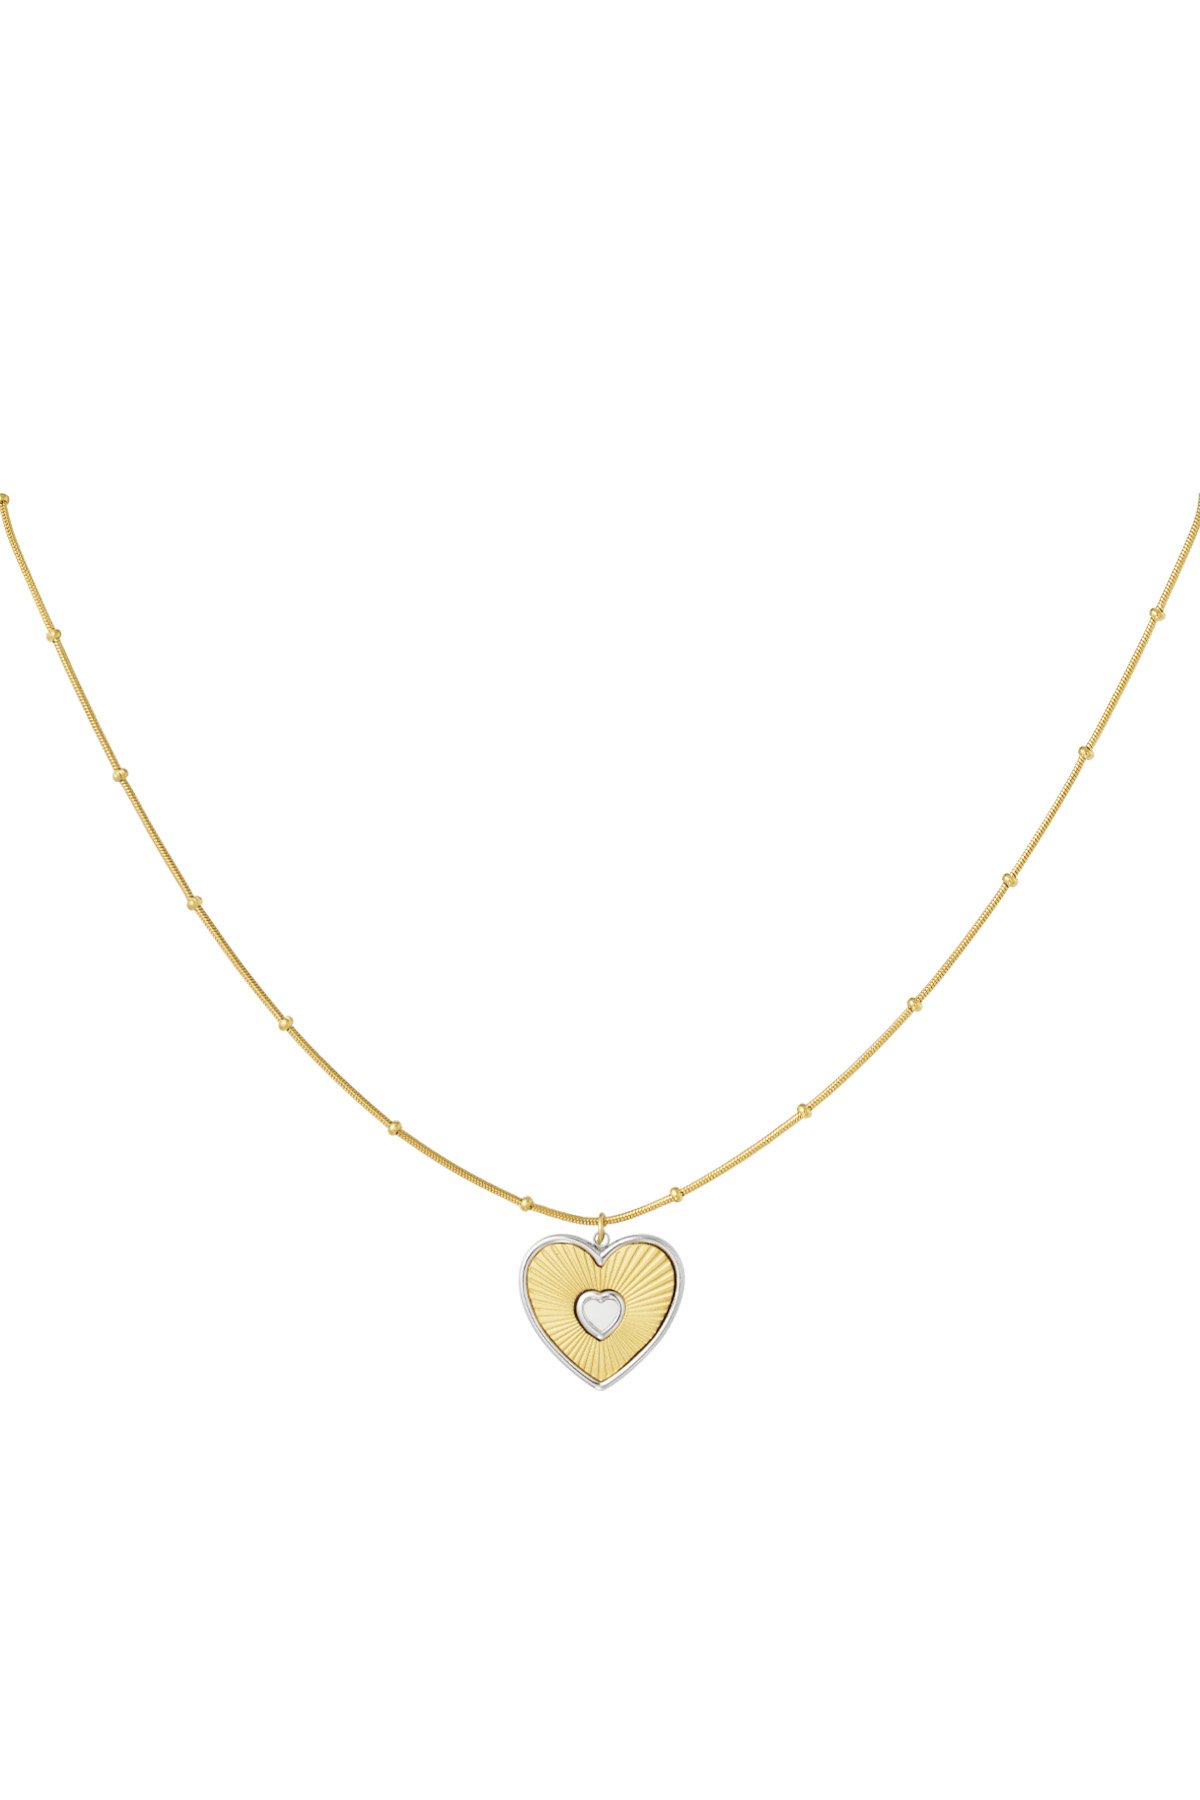 Necklace lover heart - gold h5 